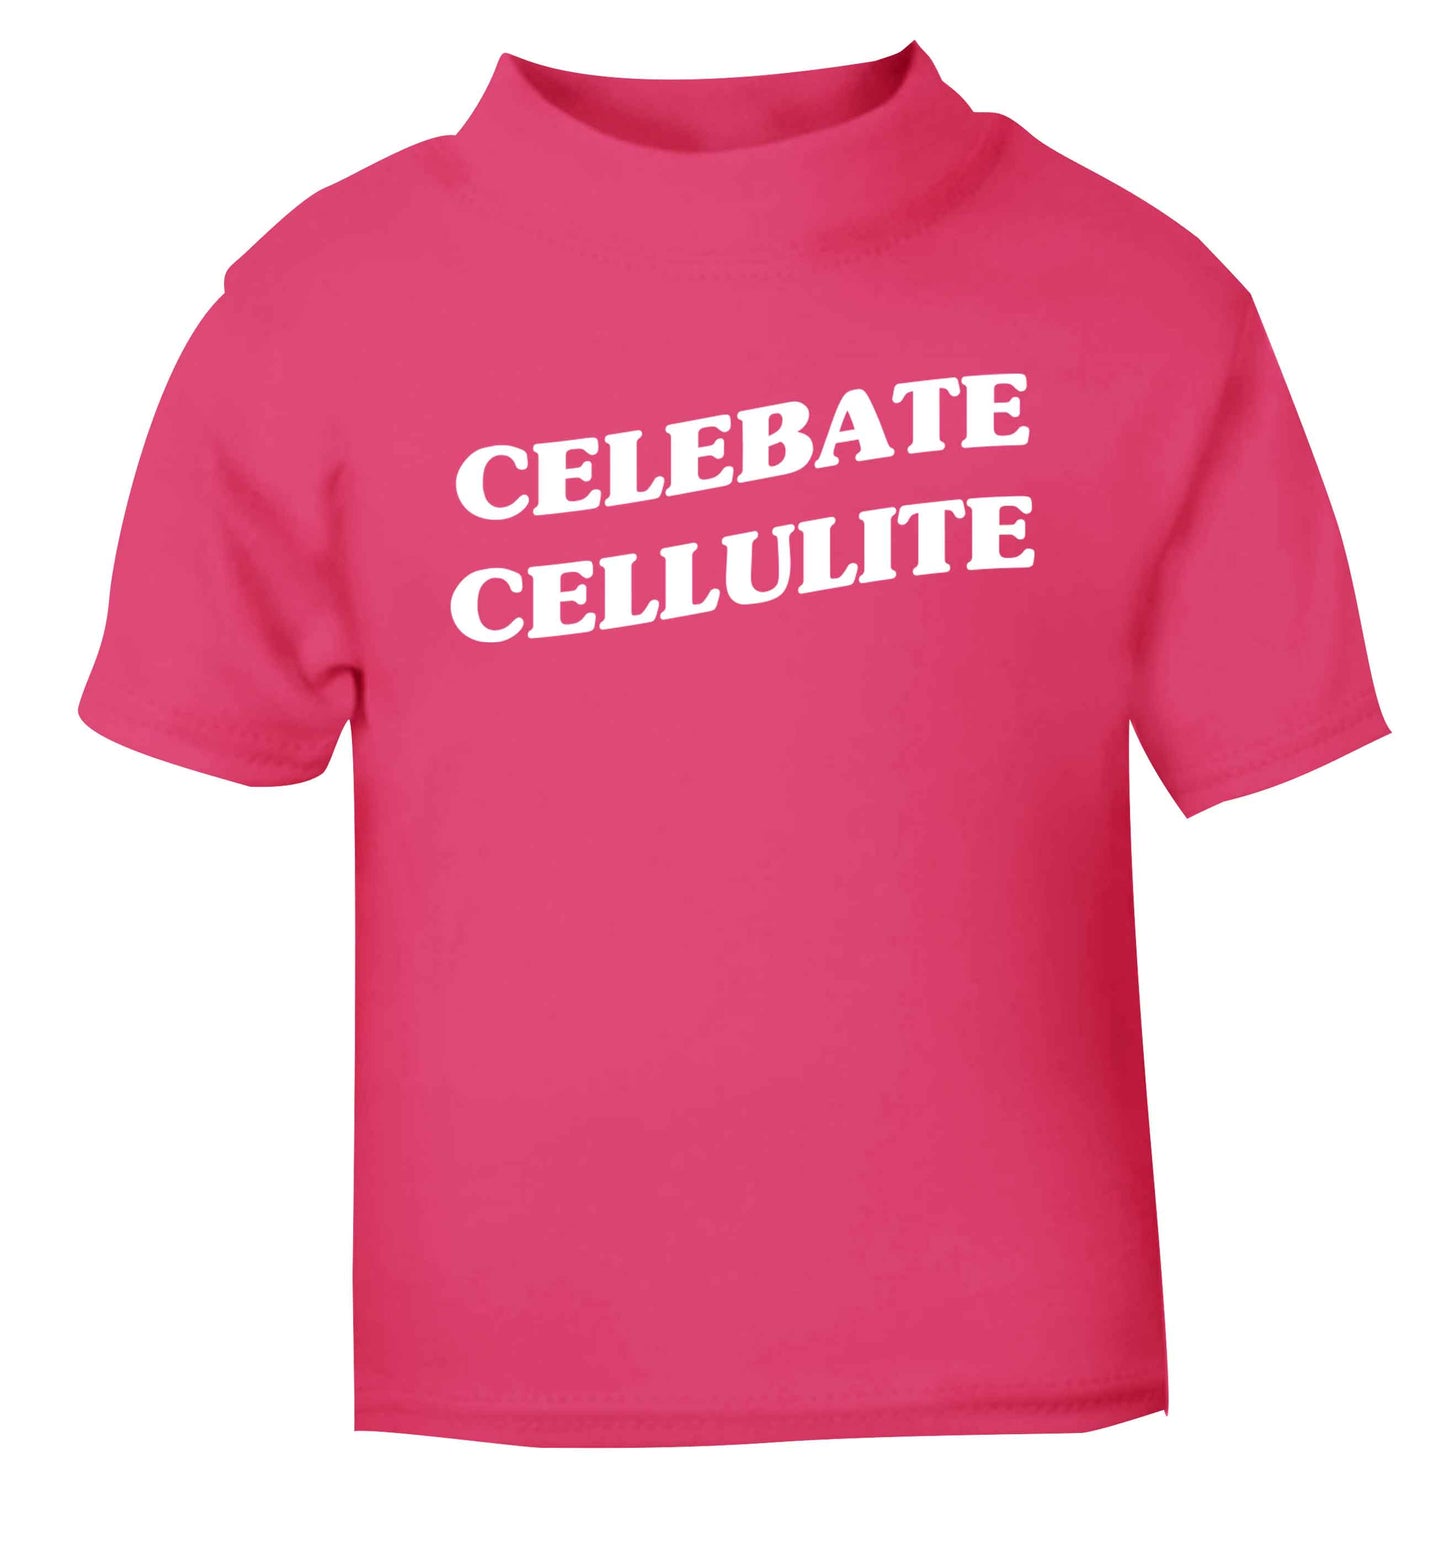 Celebrate cellulite pink baby toddler Tshirt 2 Years